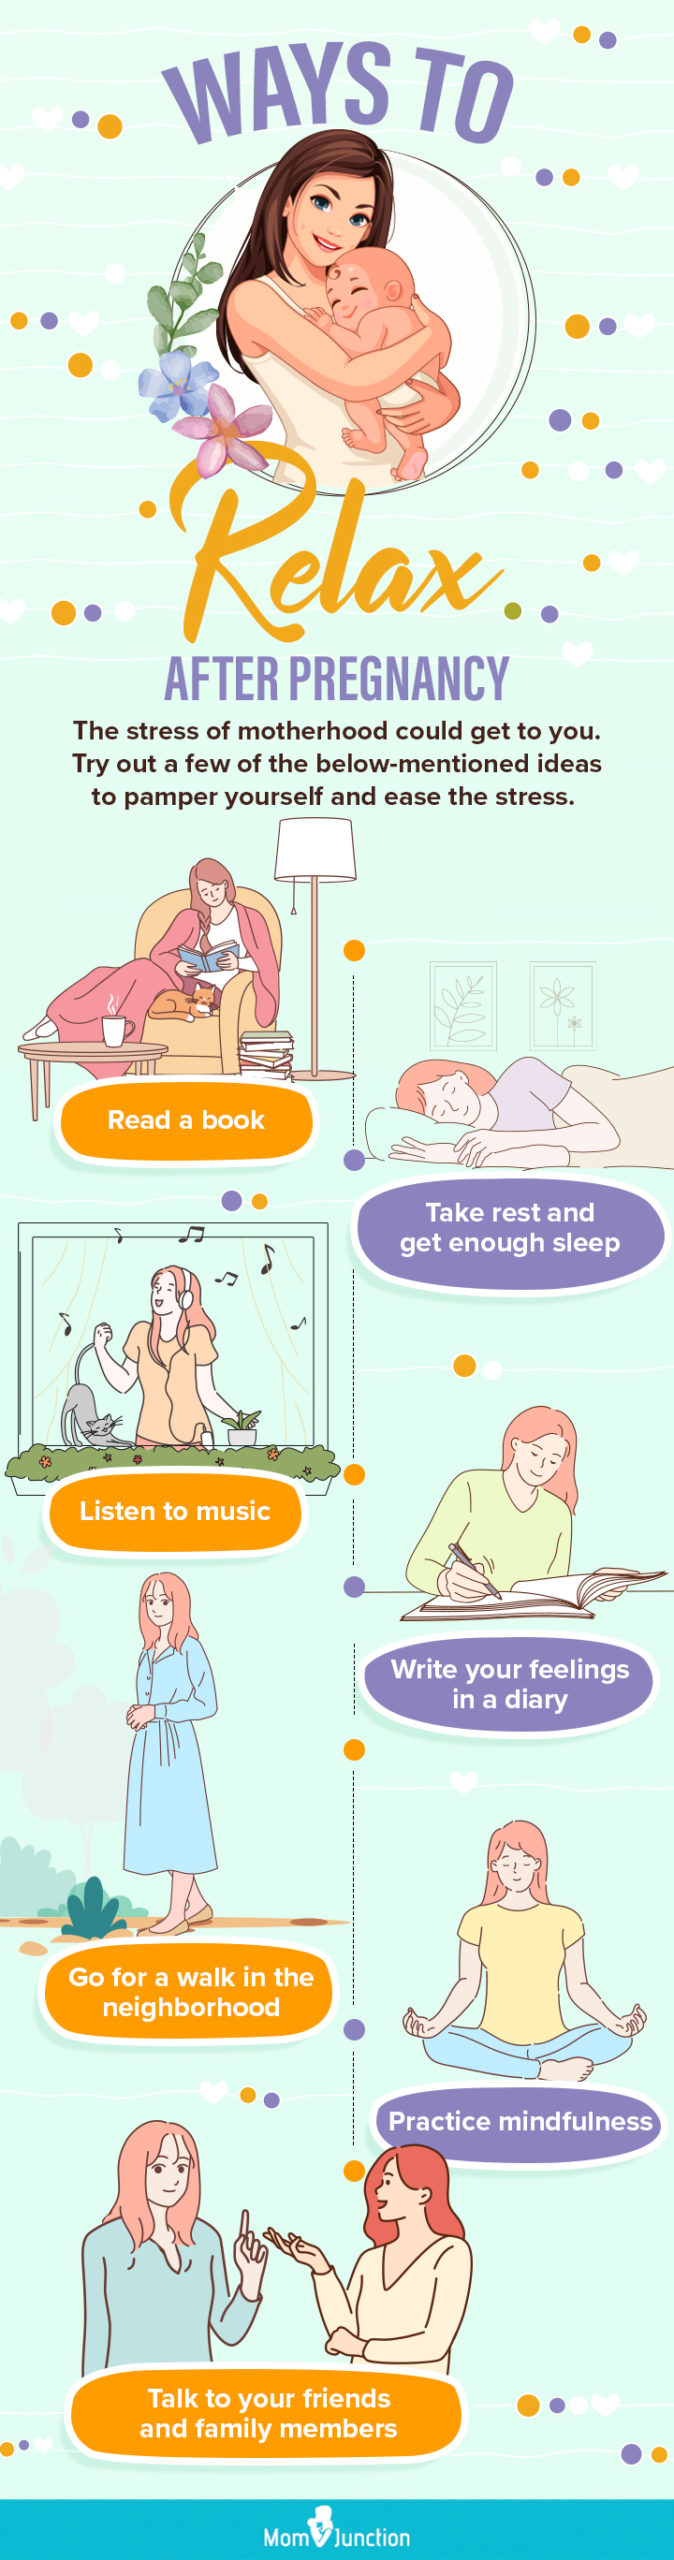 ways to relax after pregnancy [infographic]